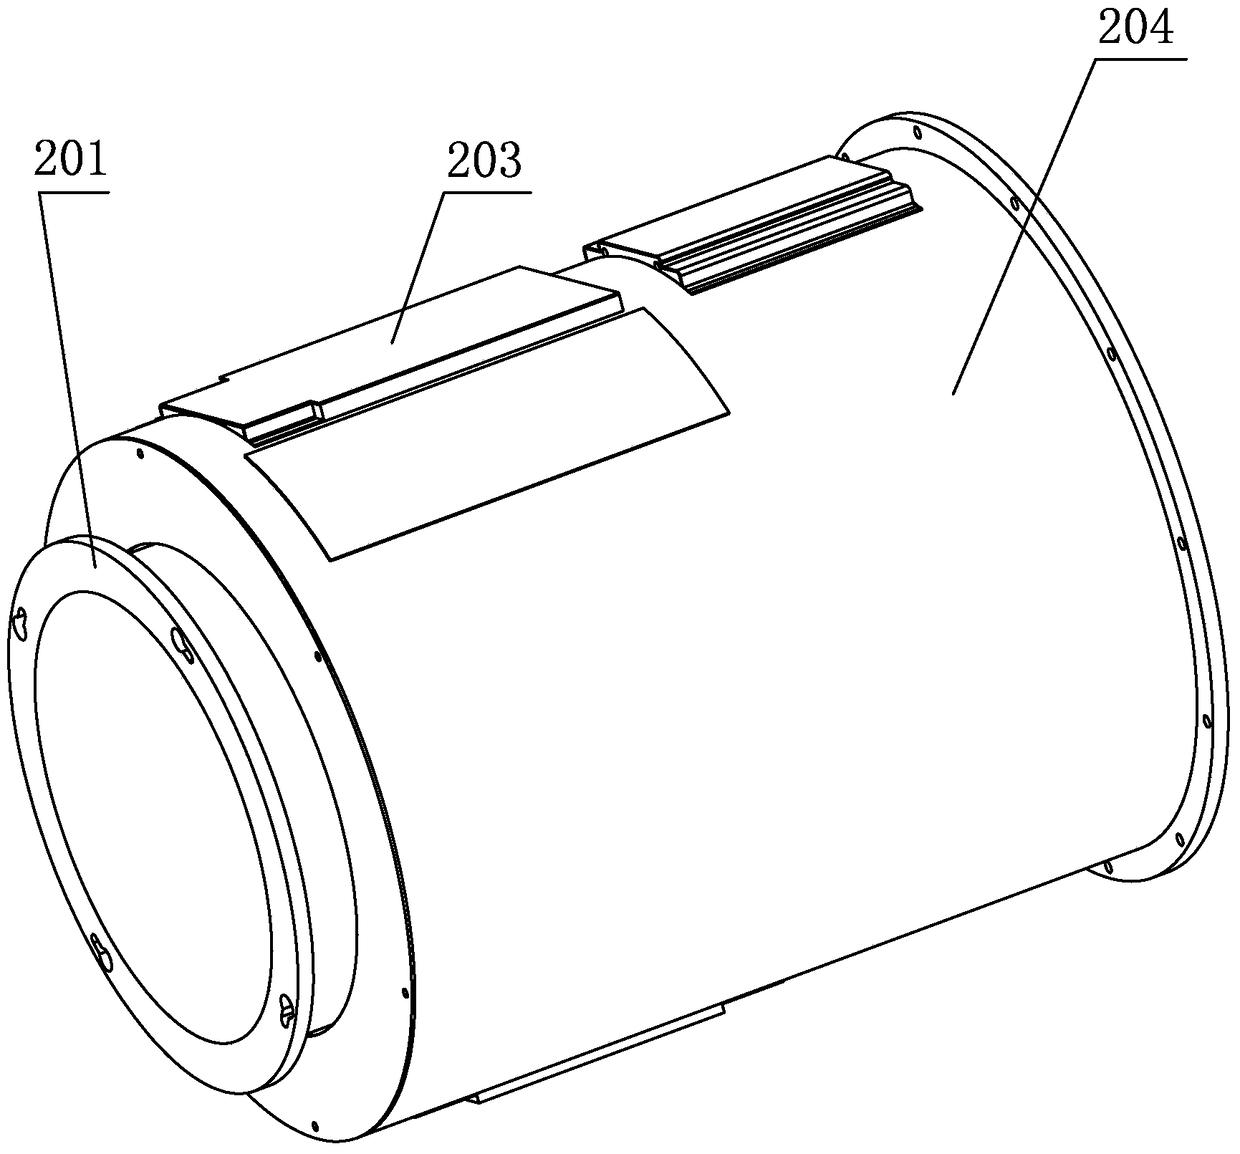 A high-power focusing lens with adjustable focus